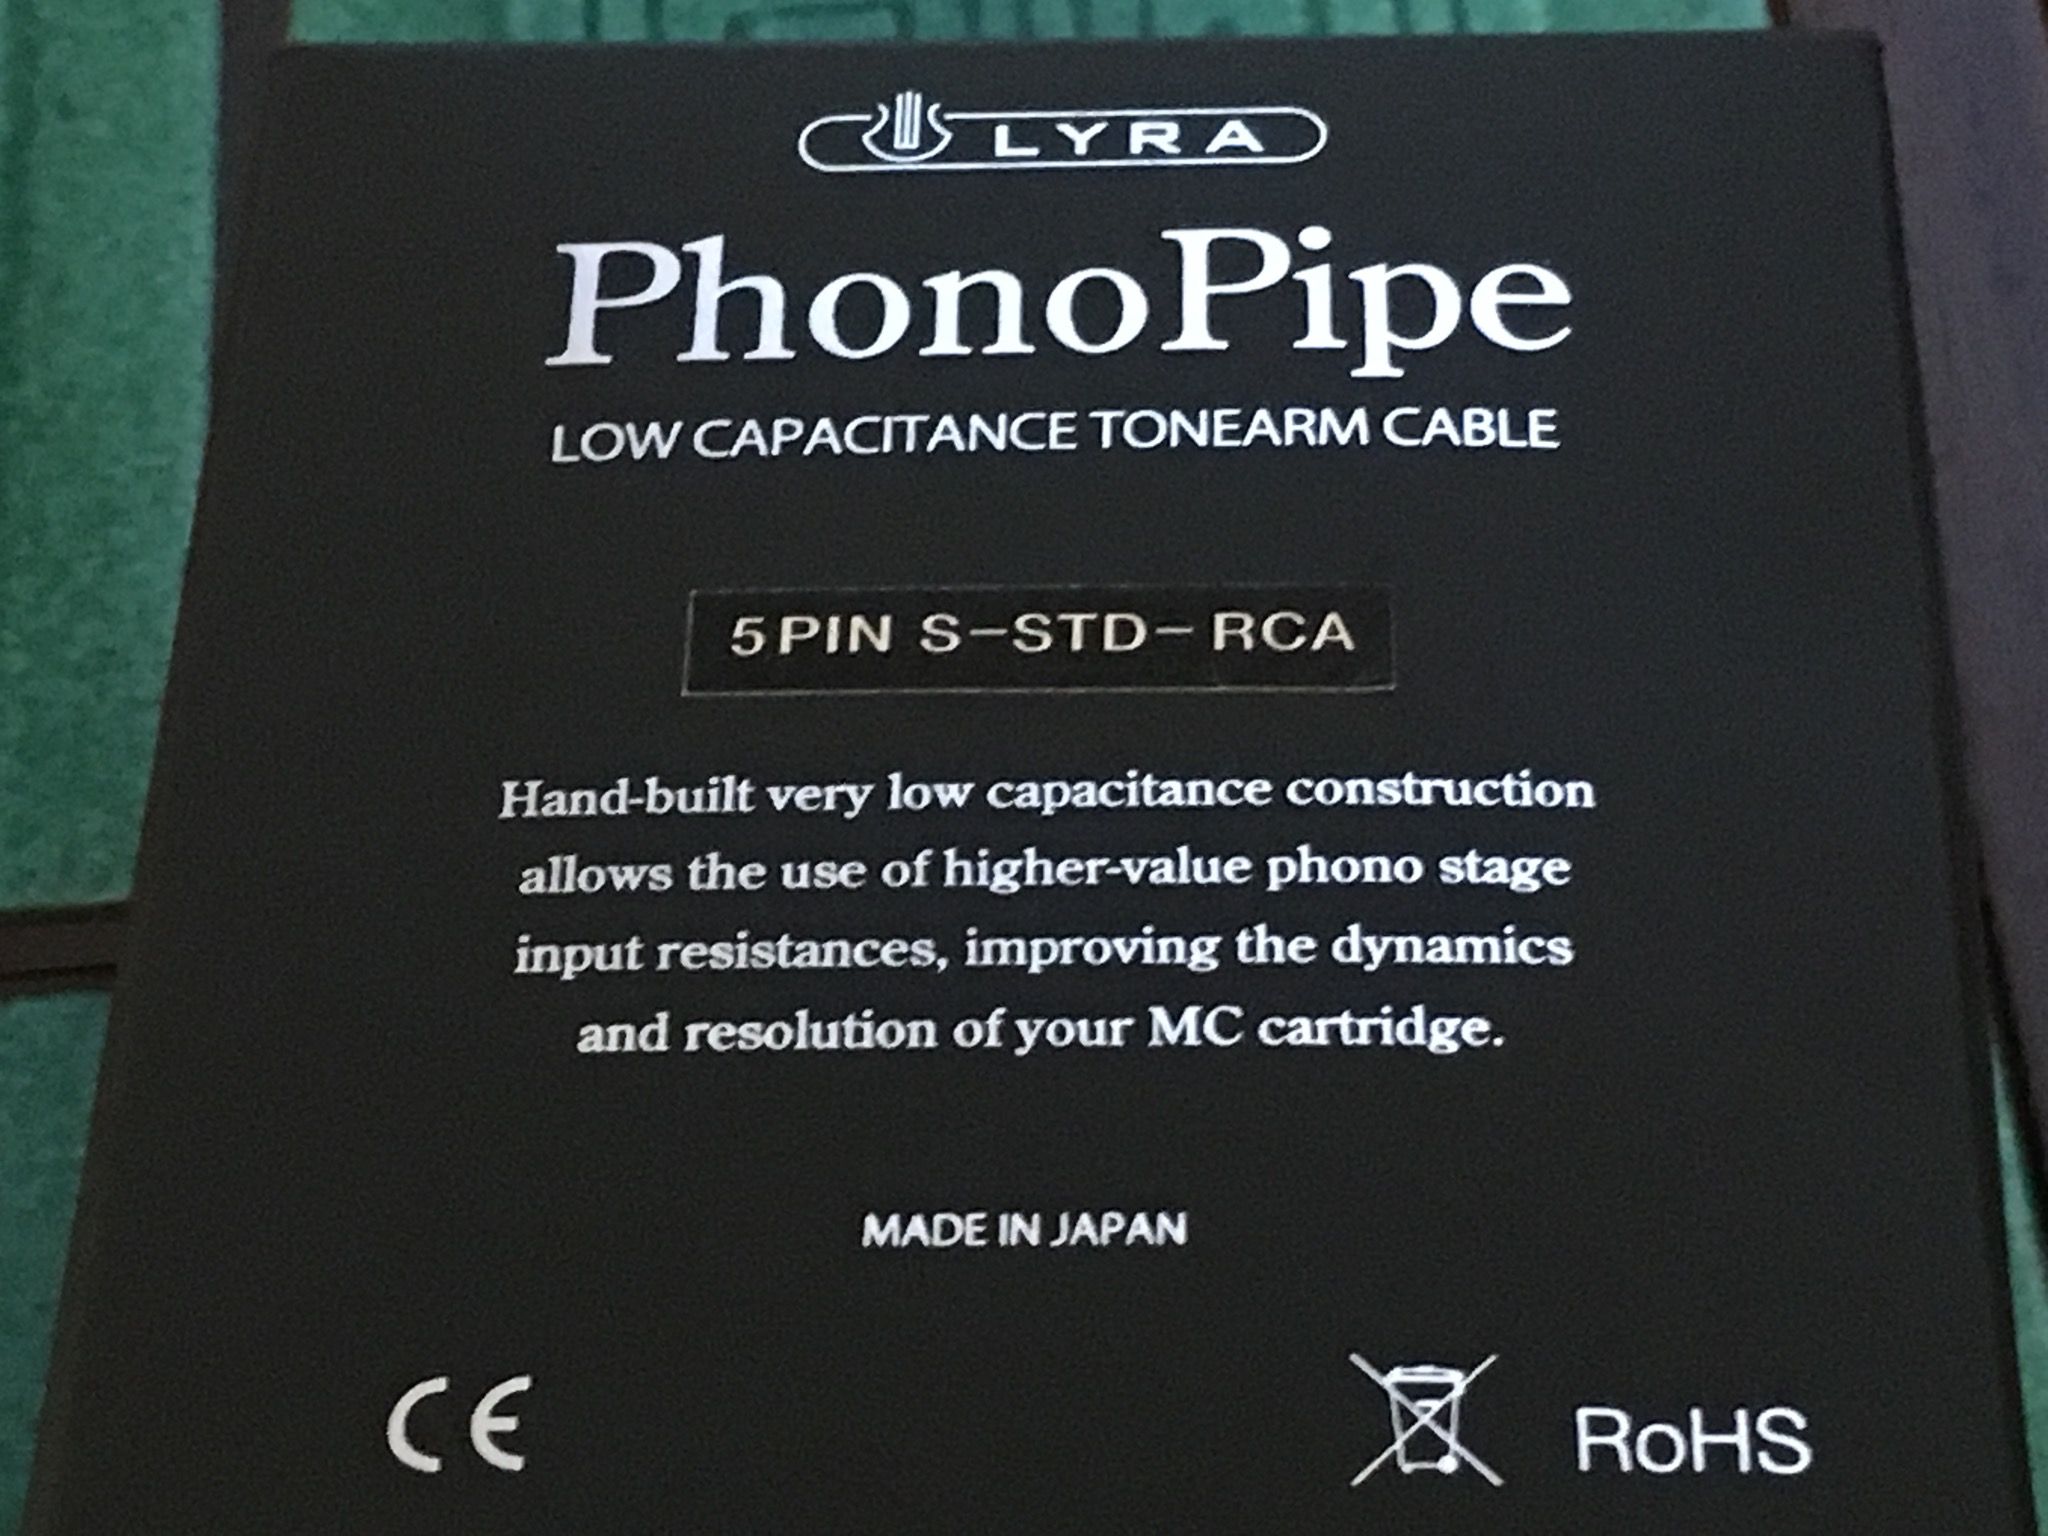 Lyra Phonopipe. All phono cables are now Lyra